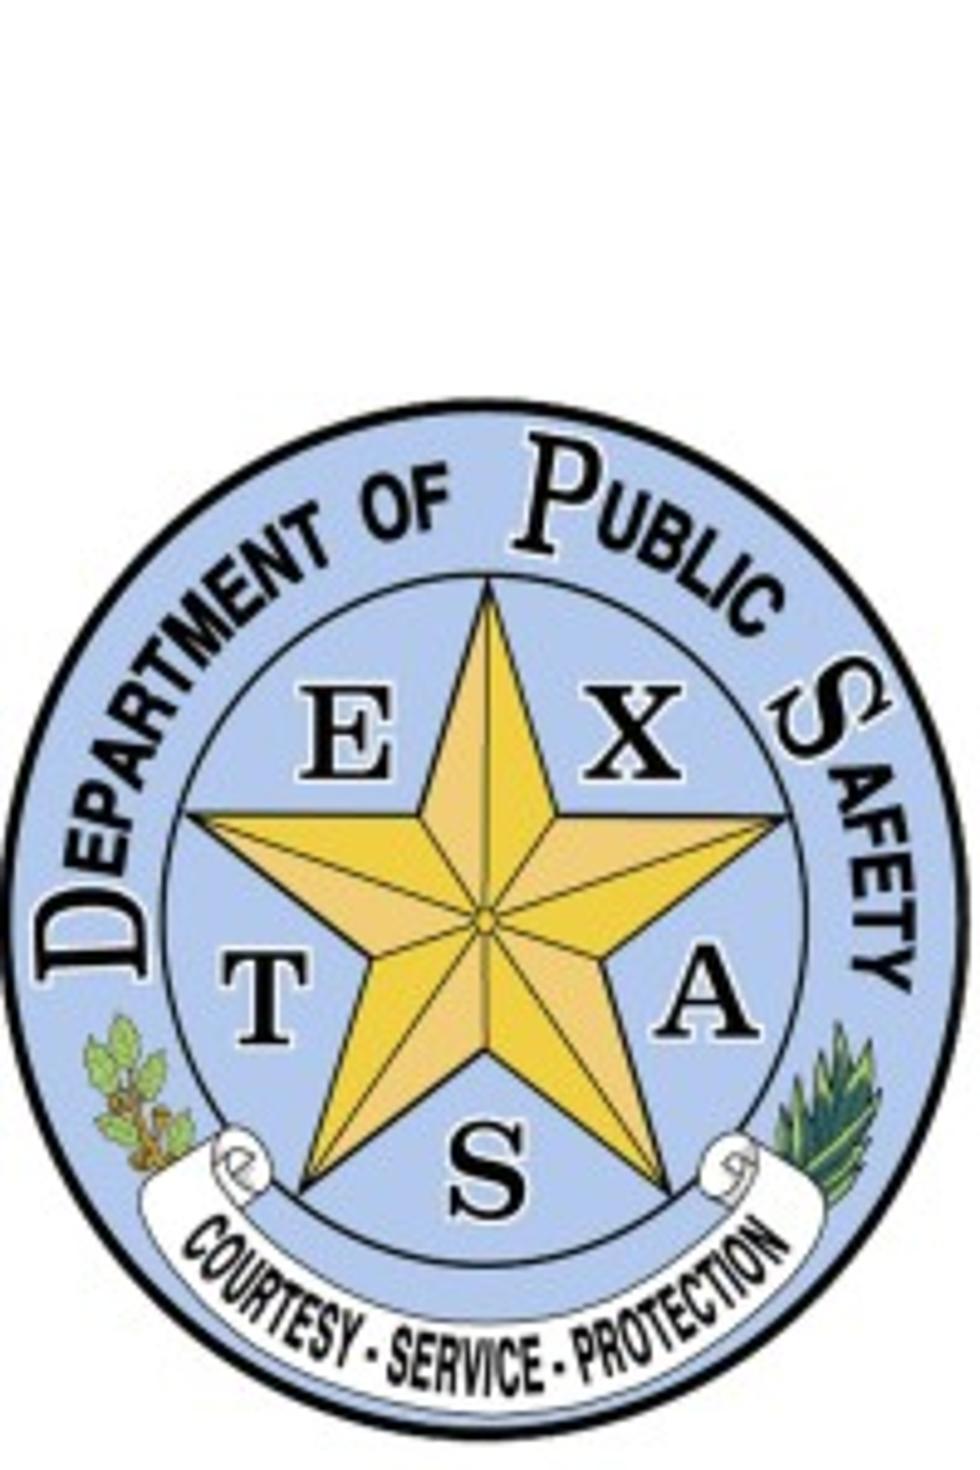 Texas Department of Public Safety Increases Proof of Residency Requirements for Drivers Licenses, ID Cards